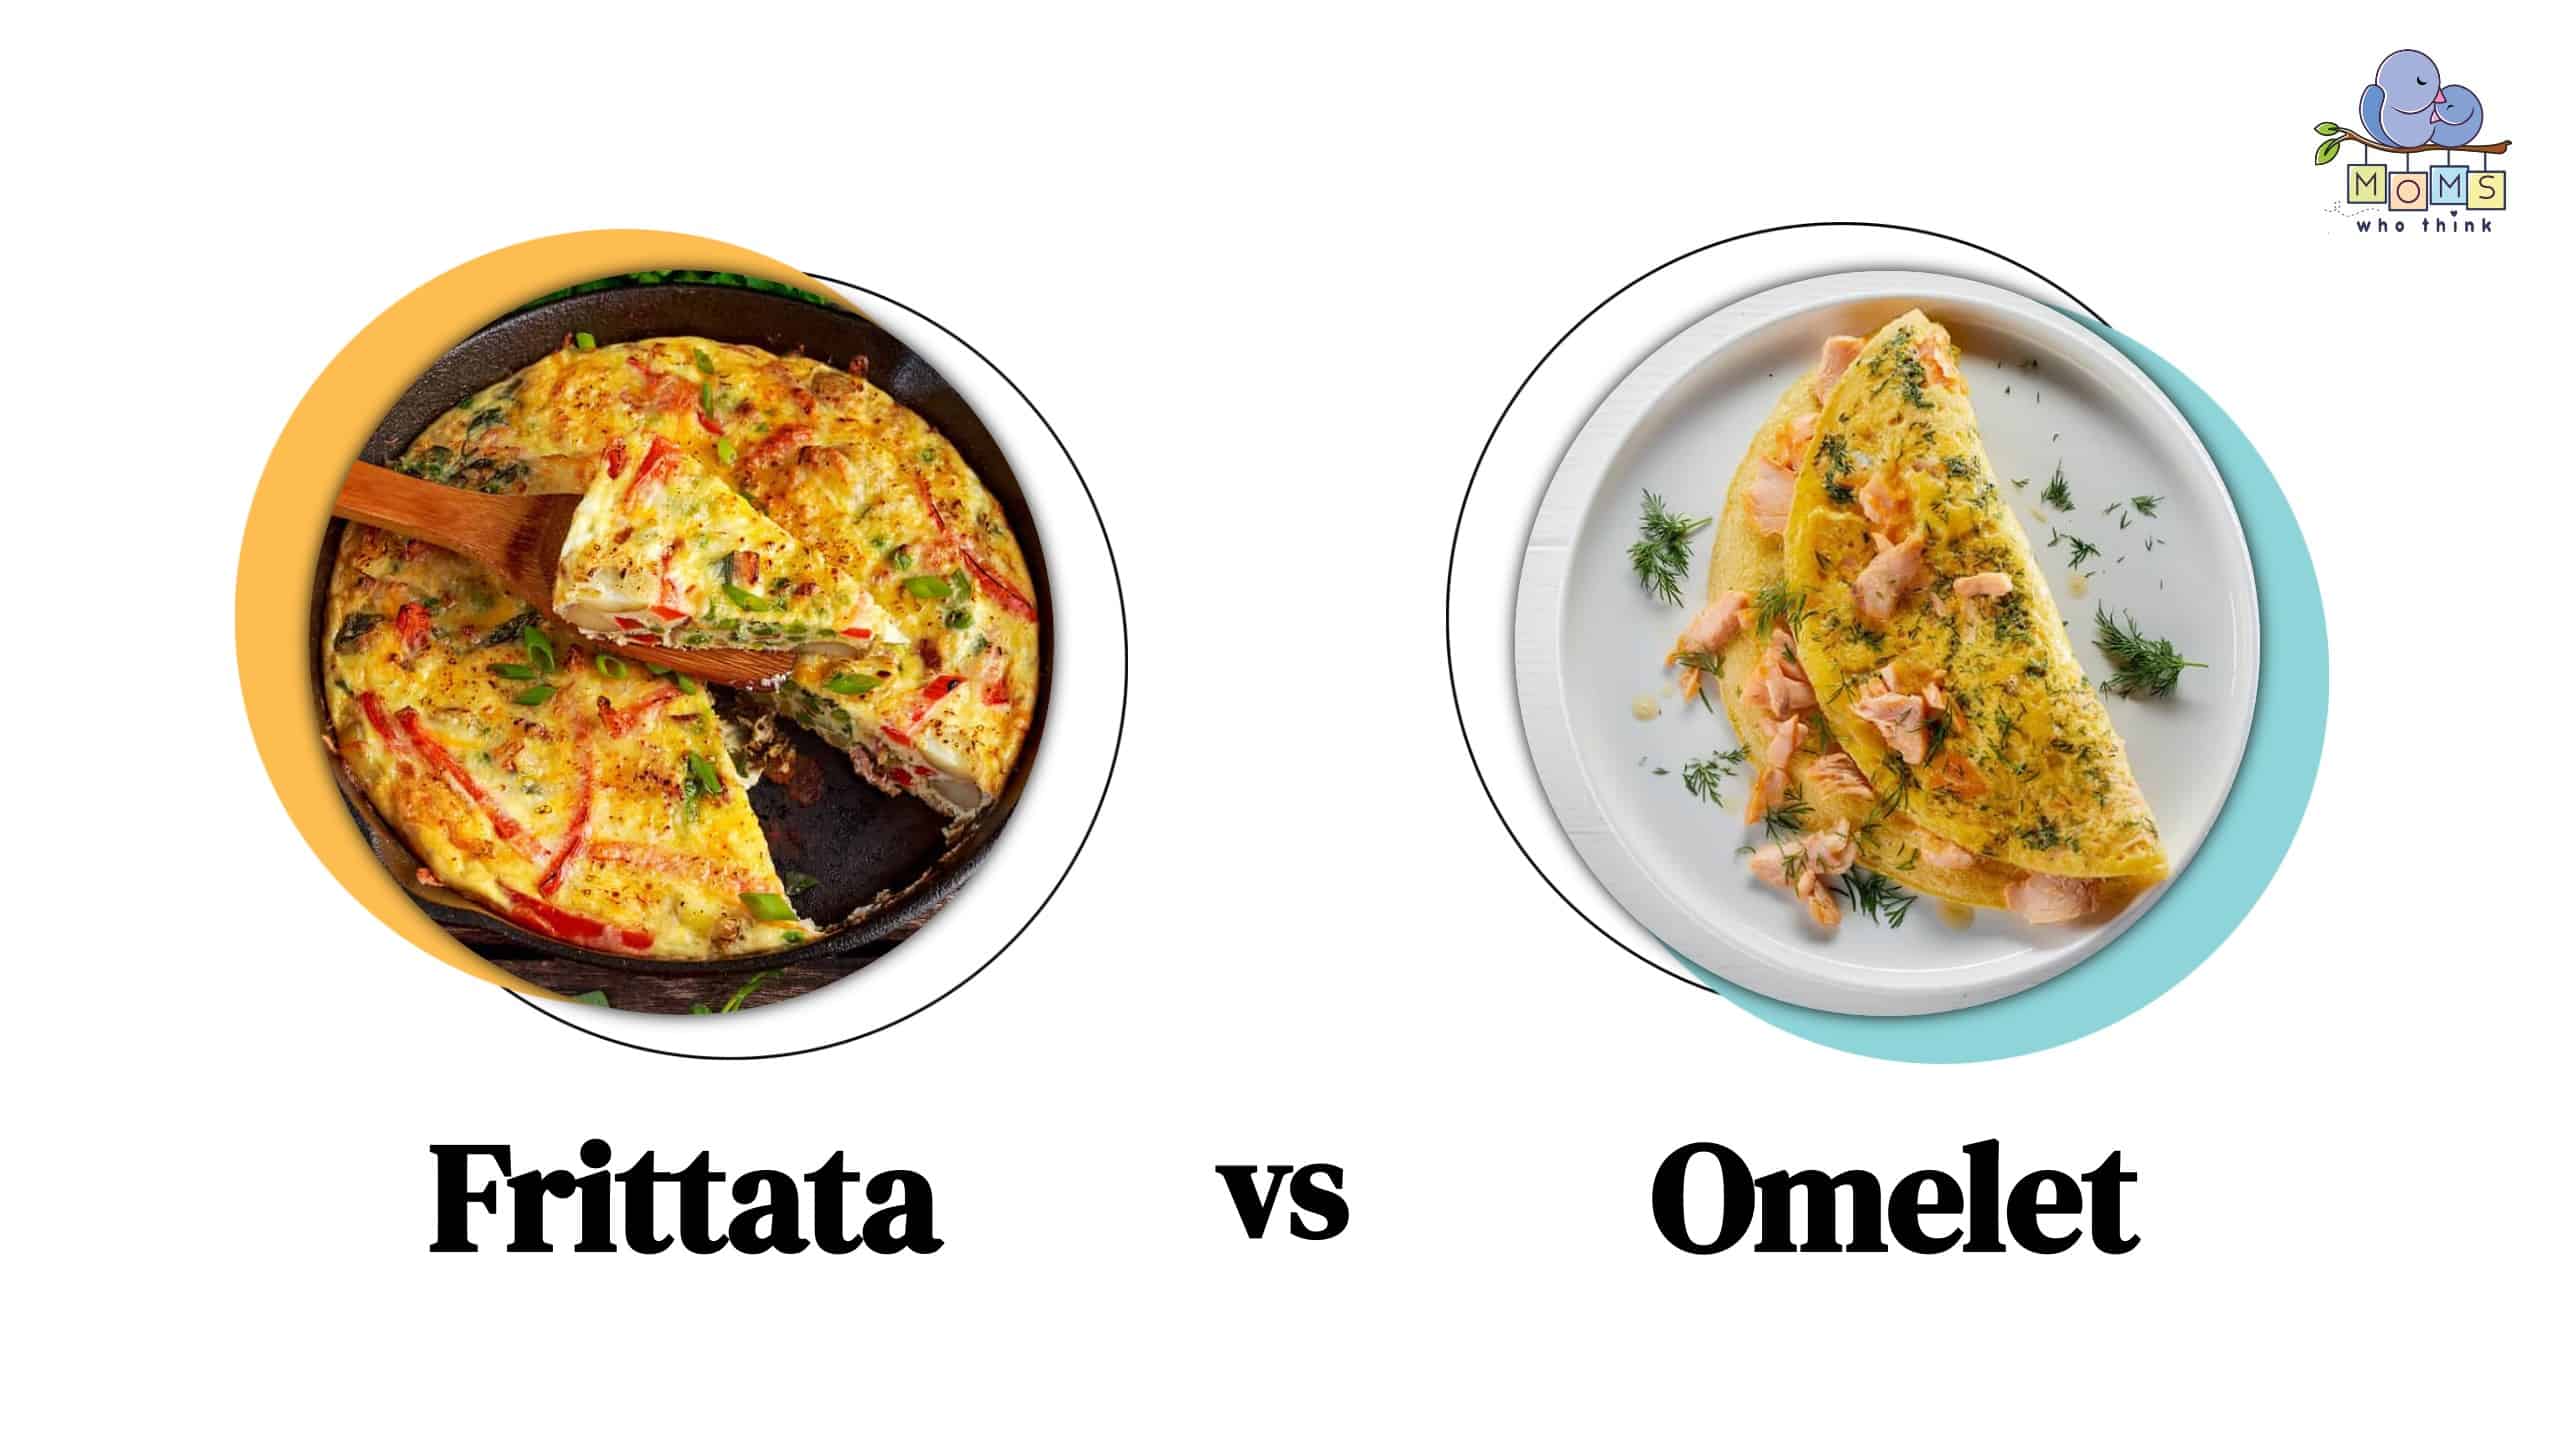 Frittata vs. Omelet: What is the Difference?